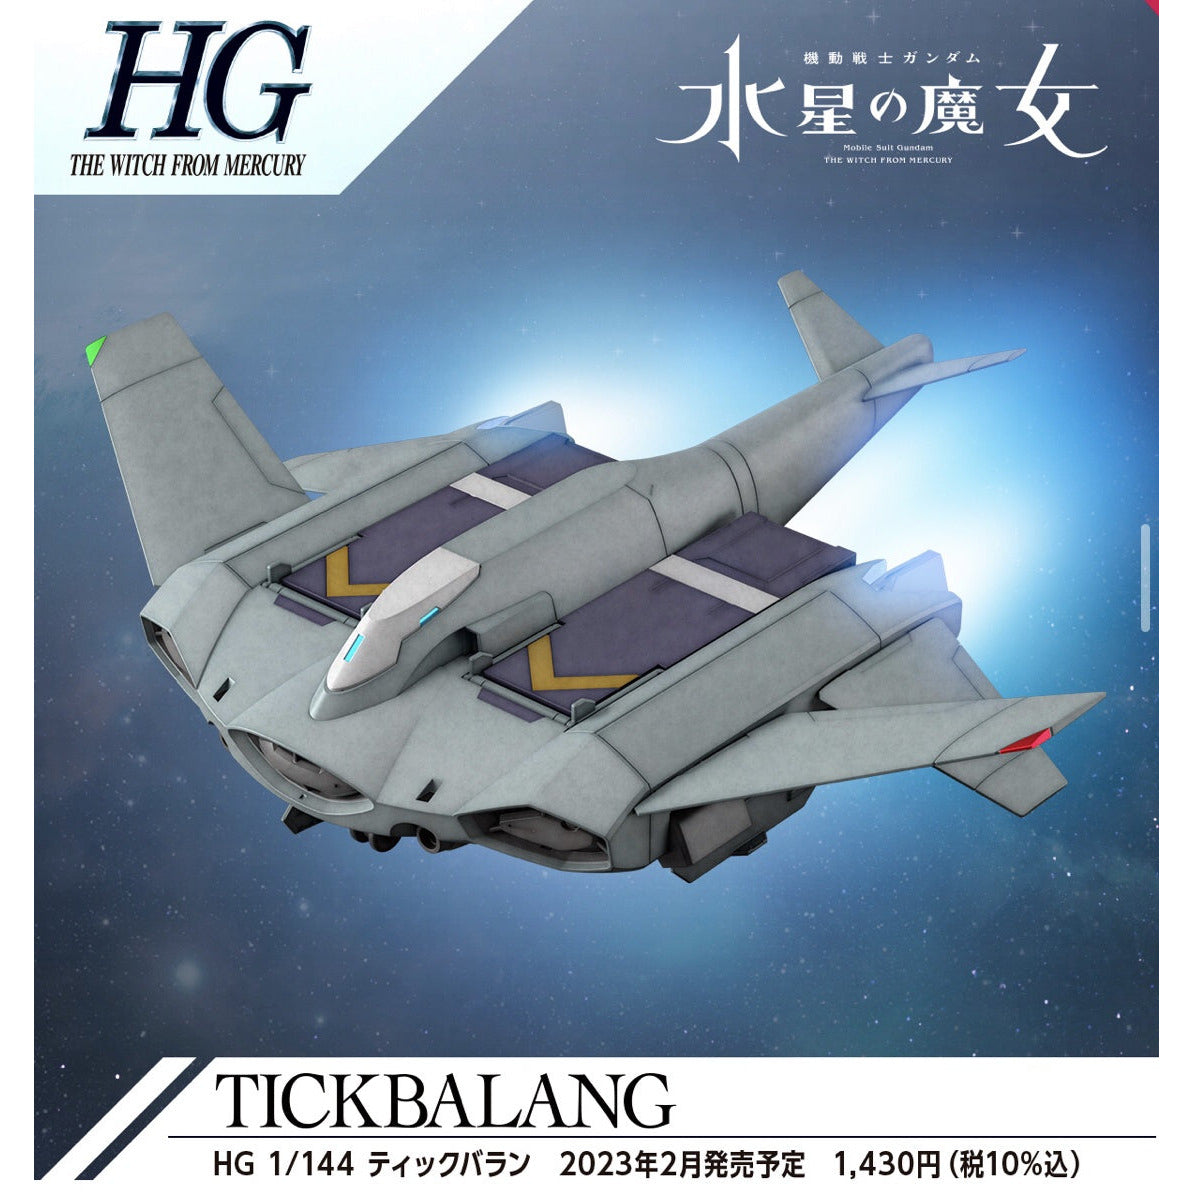 HG 1/144 The Witch From Mercury #15 Tickbalang #5065021 by Bandai